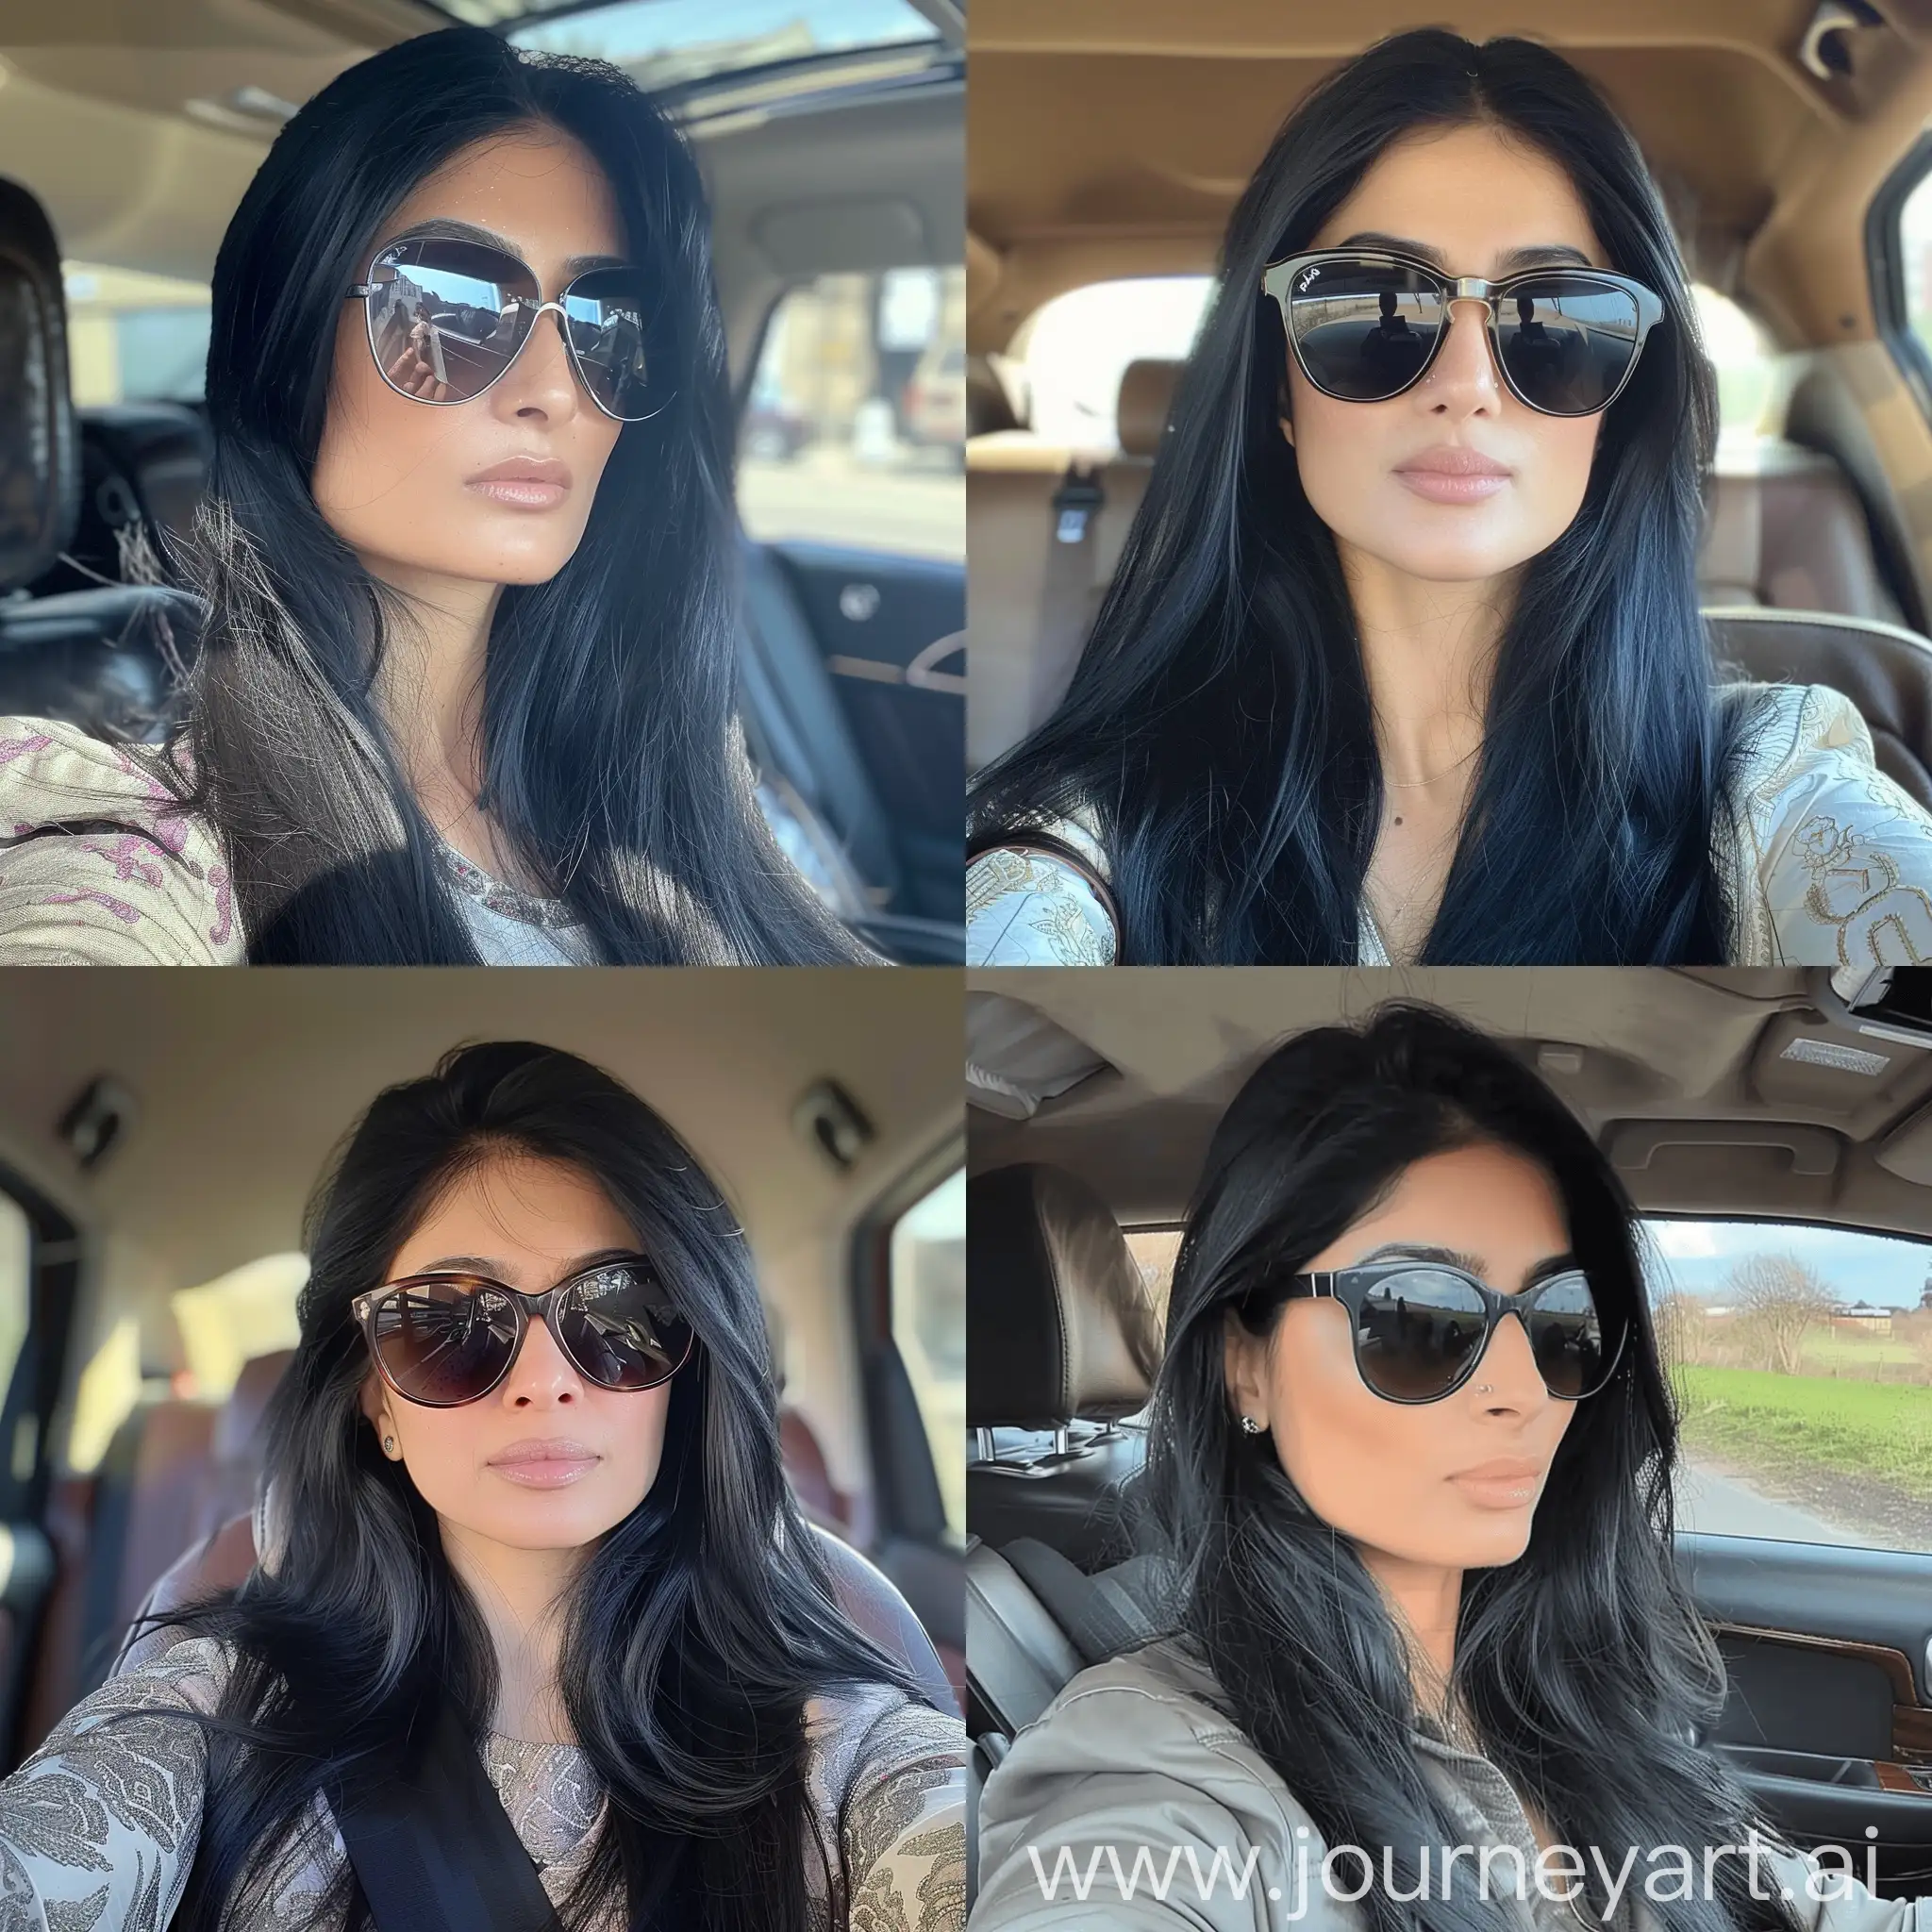 A british Pakistani women with long black hair wearing sunglasses taking selfie in a car --v 6